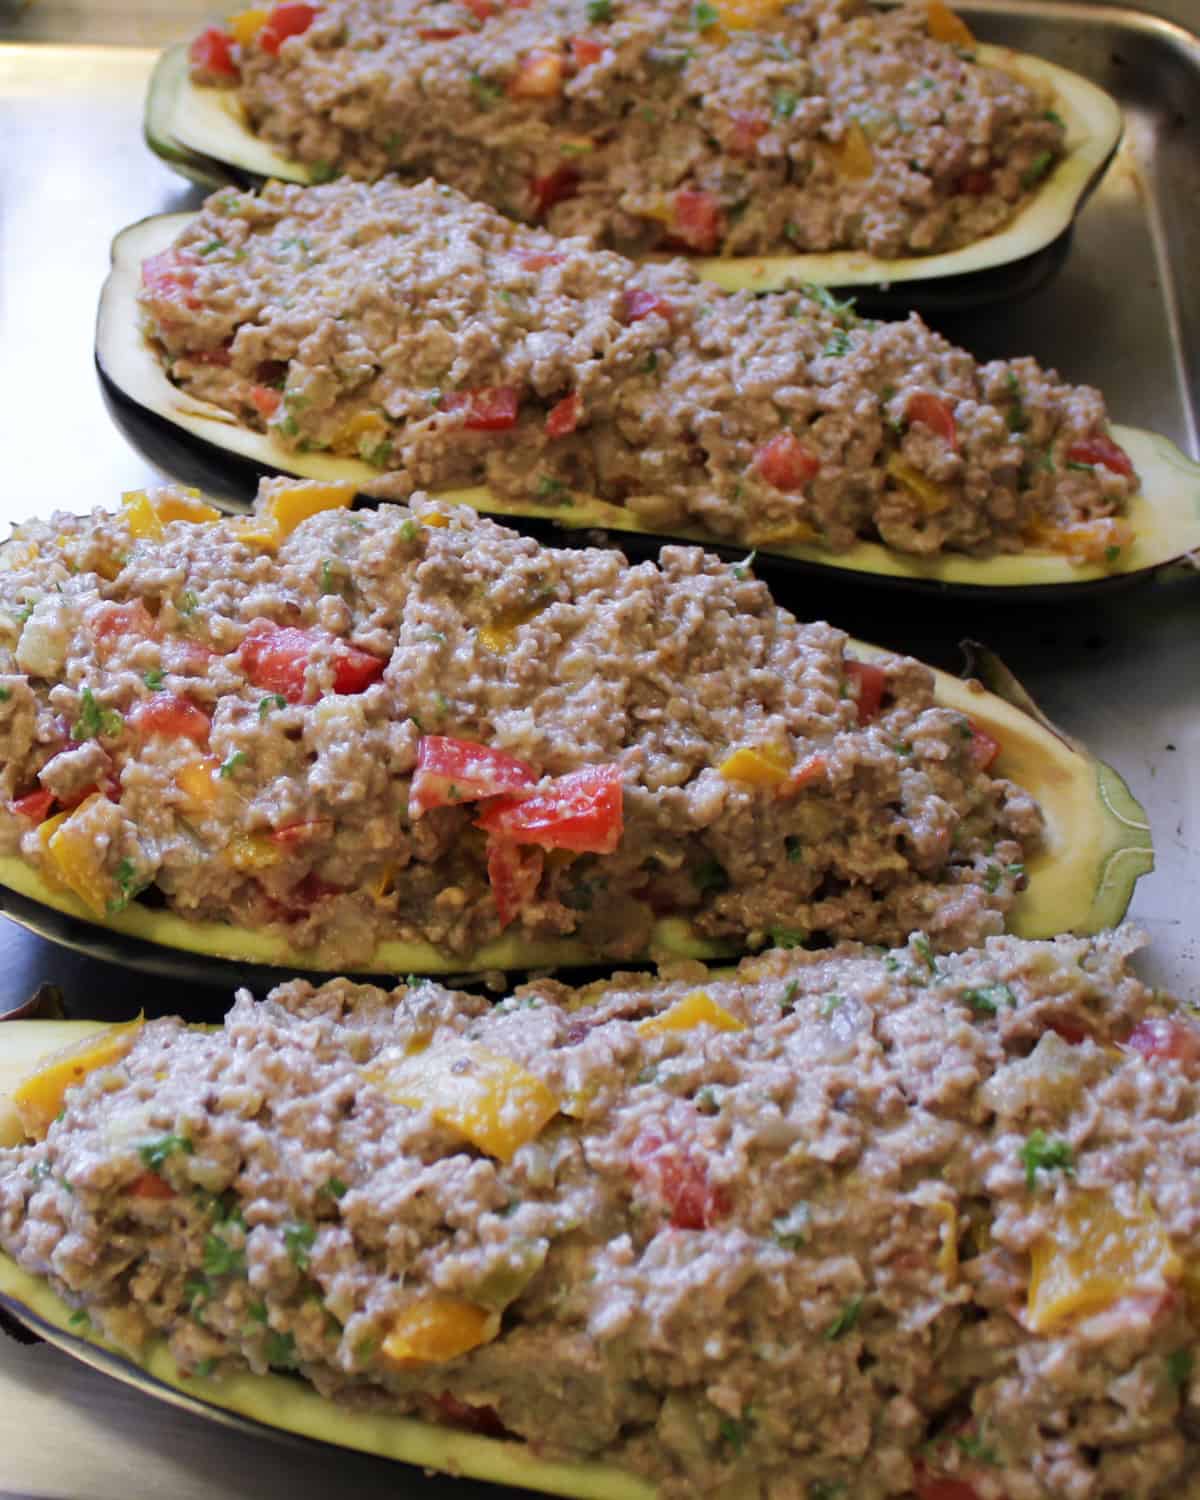 Eggplants with meat filling and ready to go in the oven.